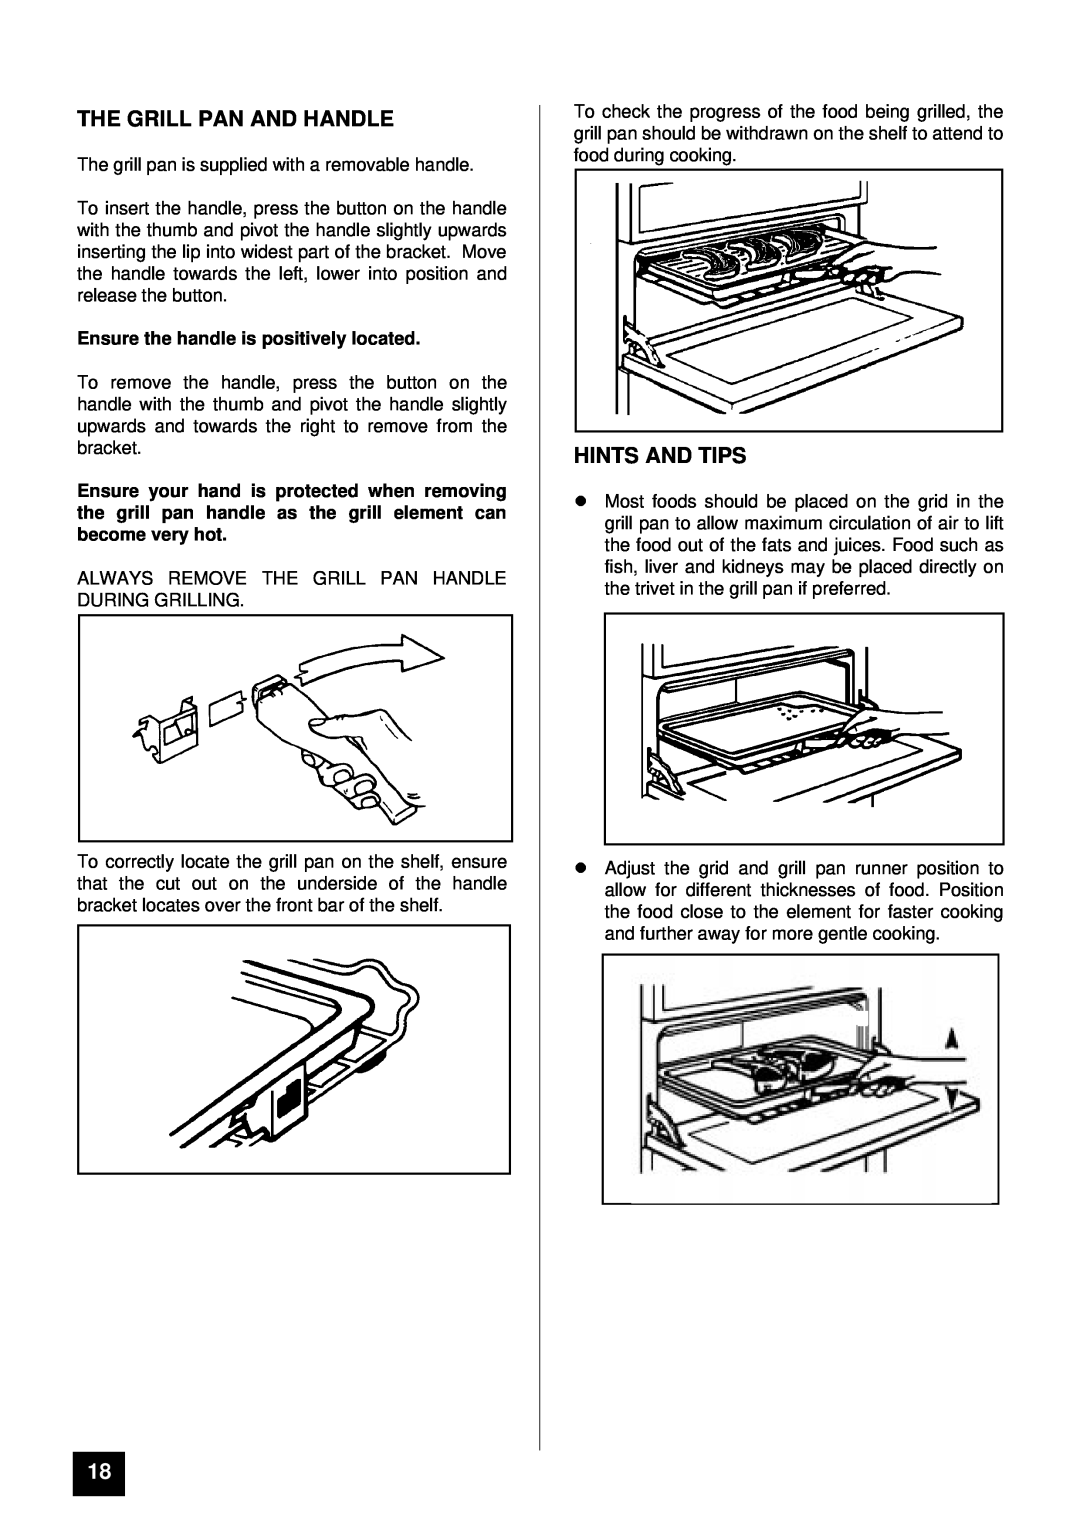 Tricity Bendix BD 921 The Grill Pan And Handle, lHINTS AND TIPS, Ensure the handle is positively located 